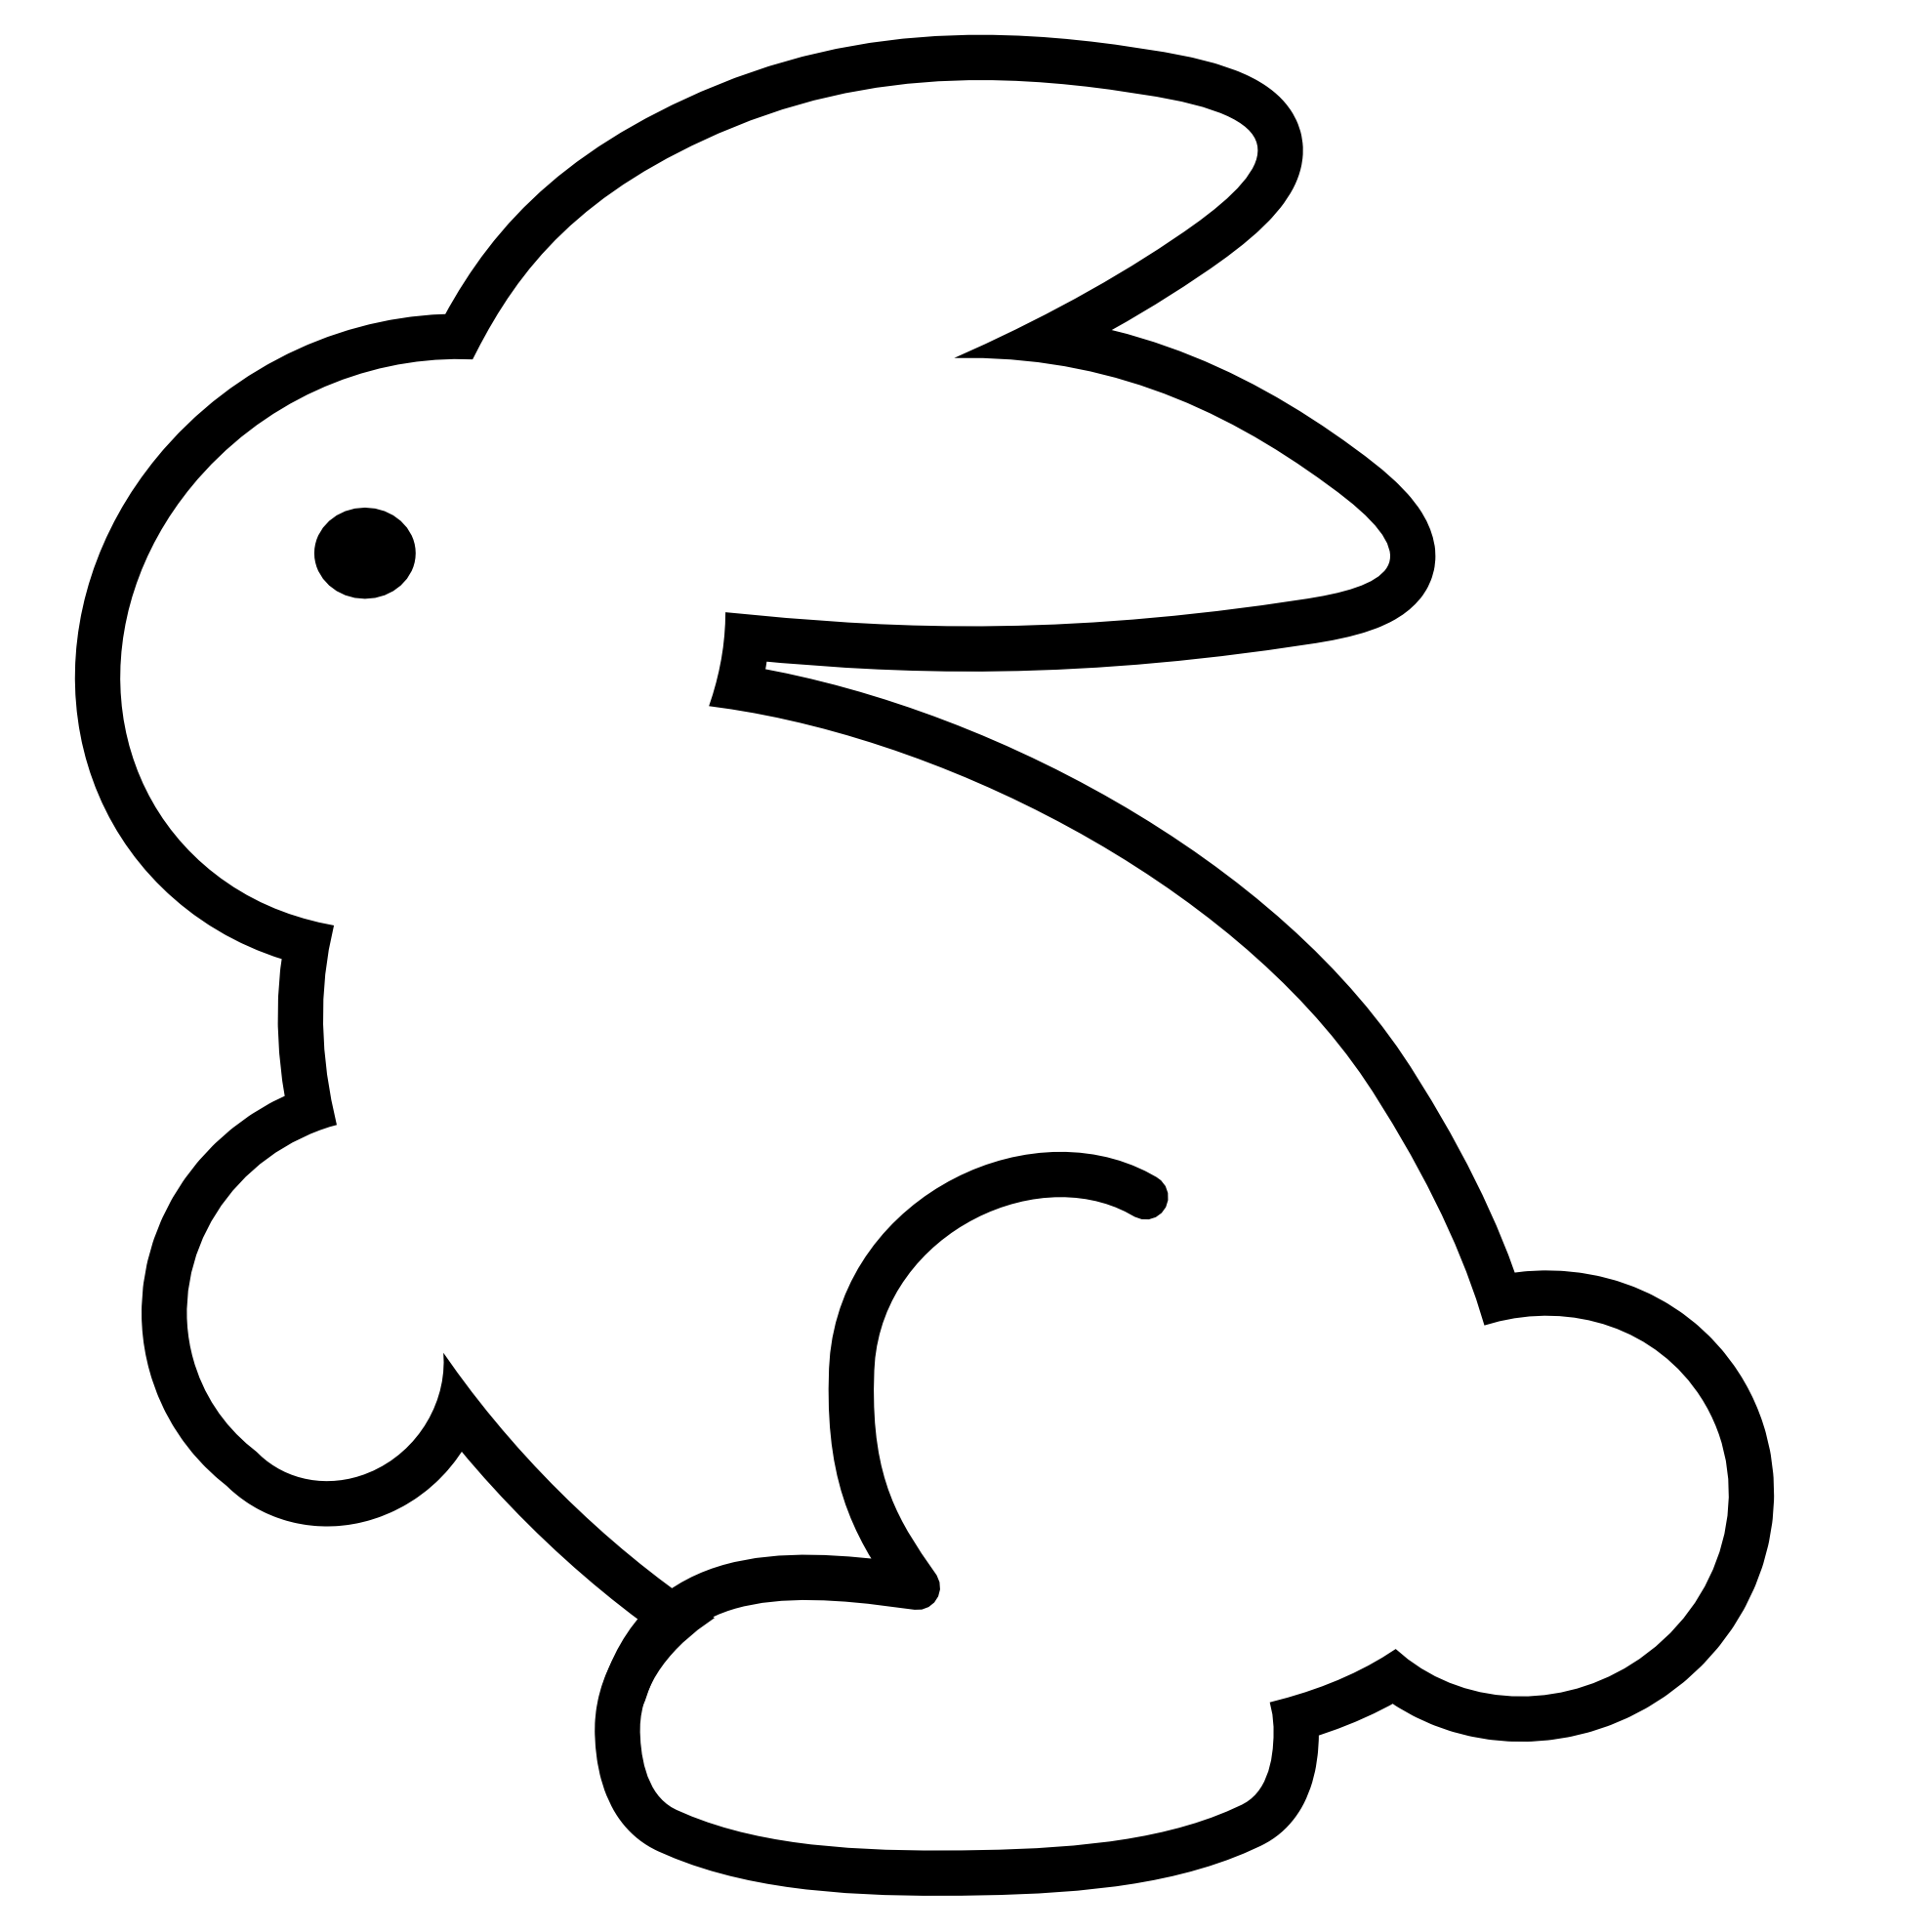 Bunny  black and white bunny clipart black and white free images 3